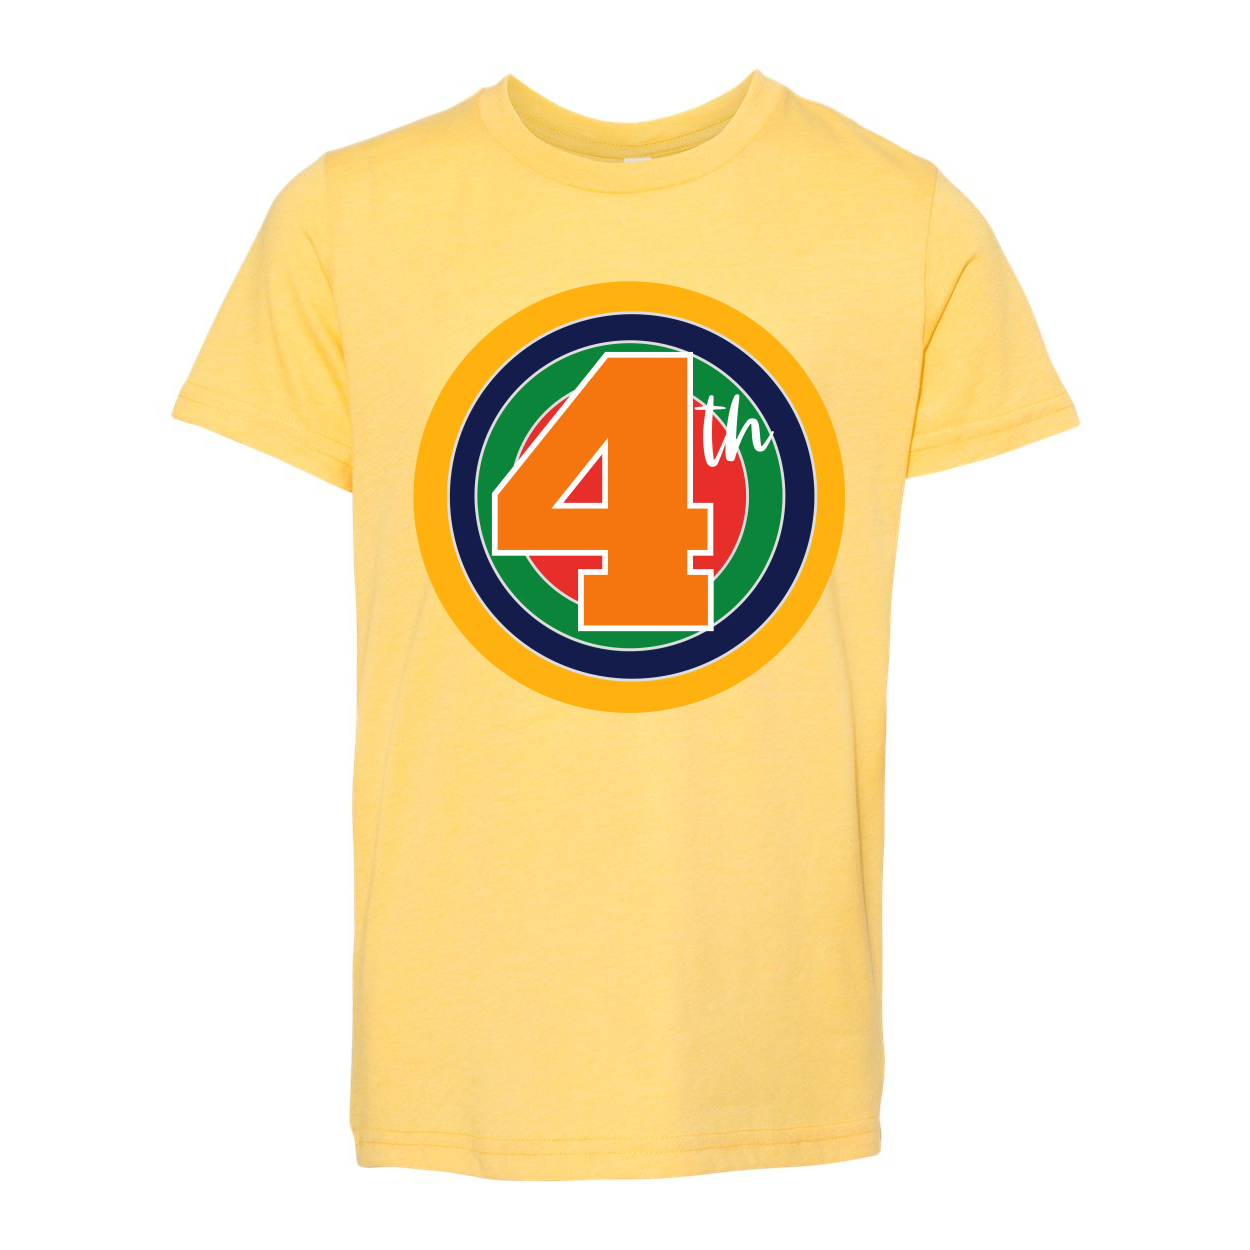 Fourth Grade YOUTH Target Tee